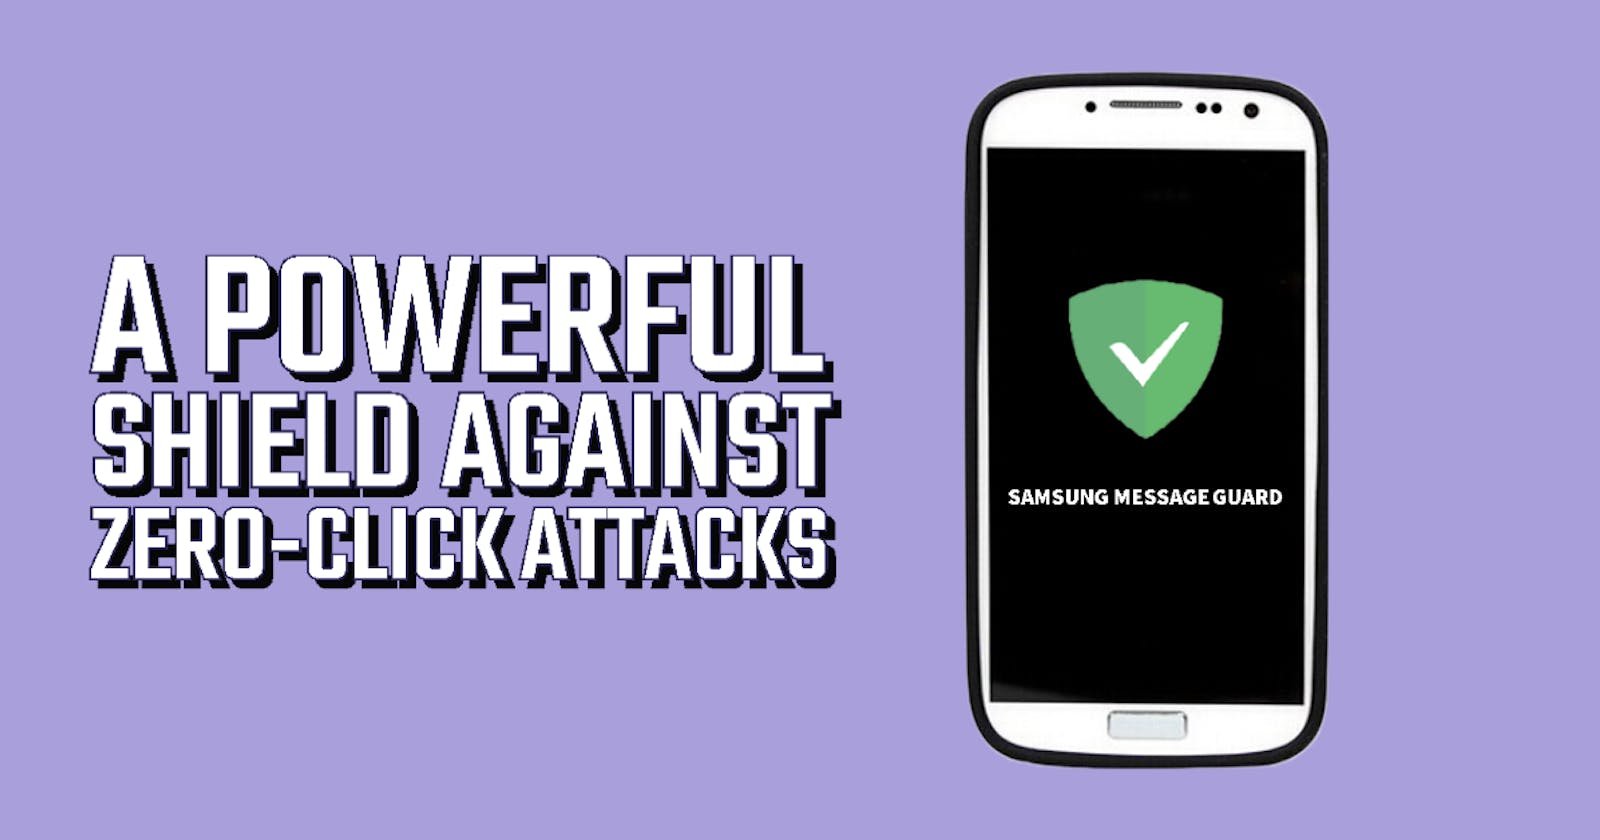 Samsung's Message Guard: A Powerful Shield Against Zero-Click Attacks